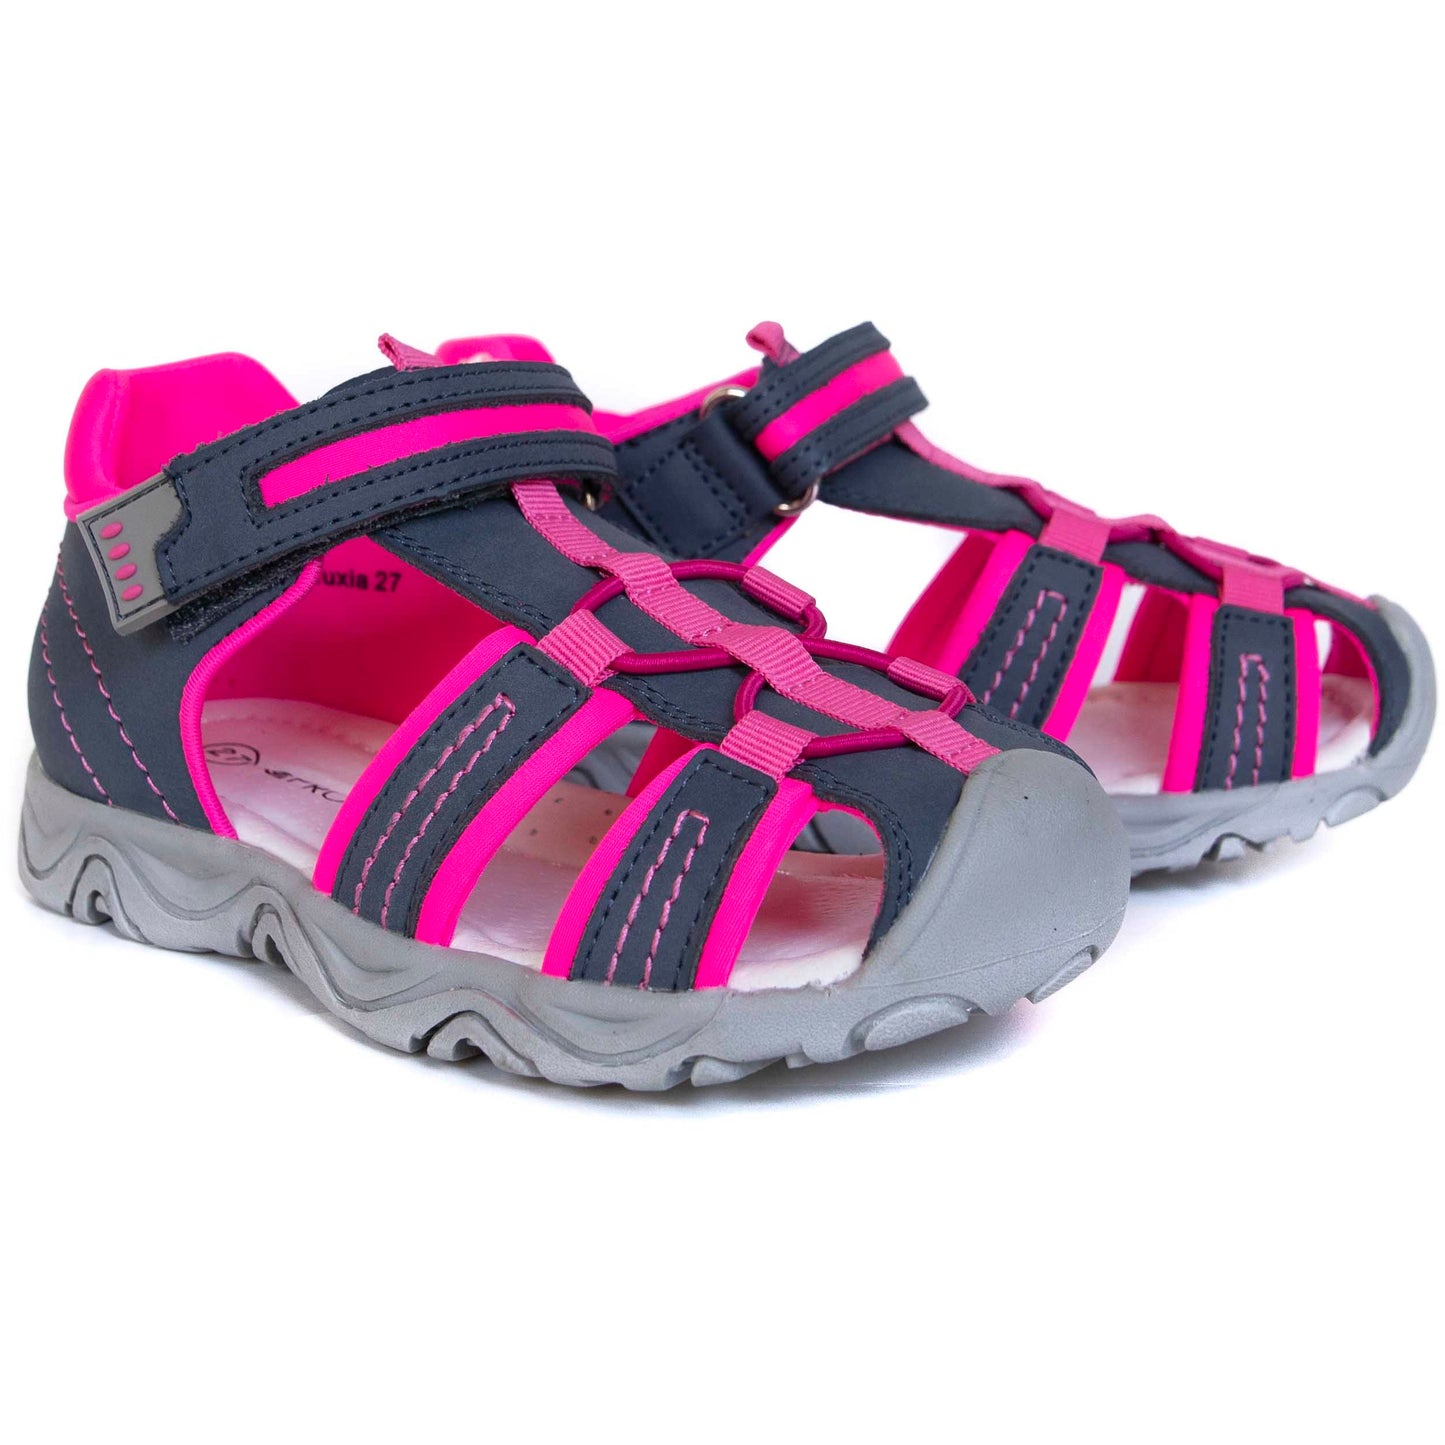 ART fuchsia older girls arch support sandals - feelgoodshoes.ae